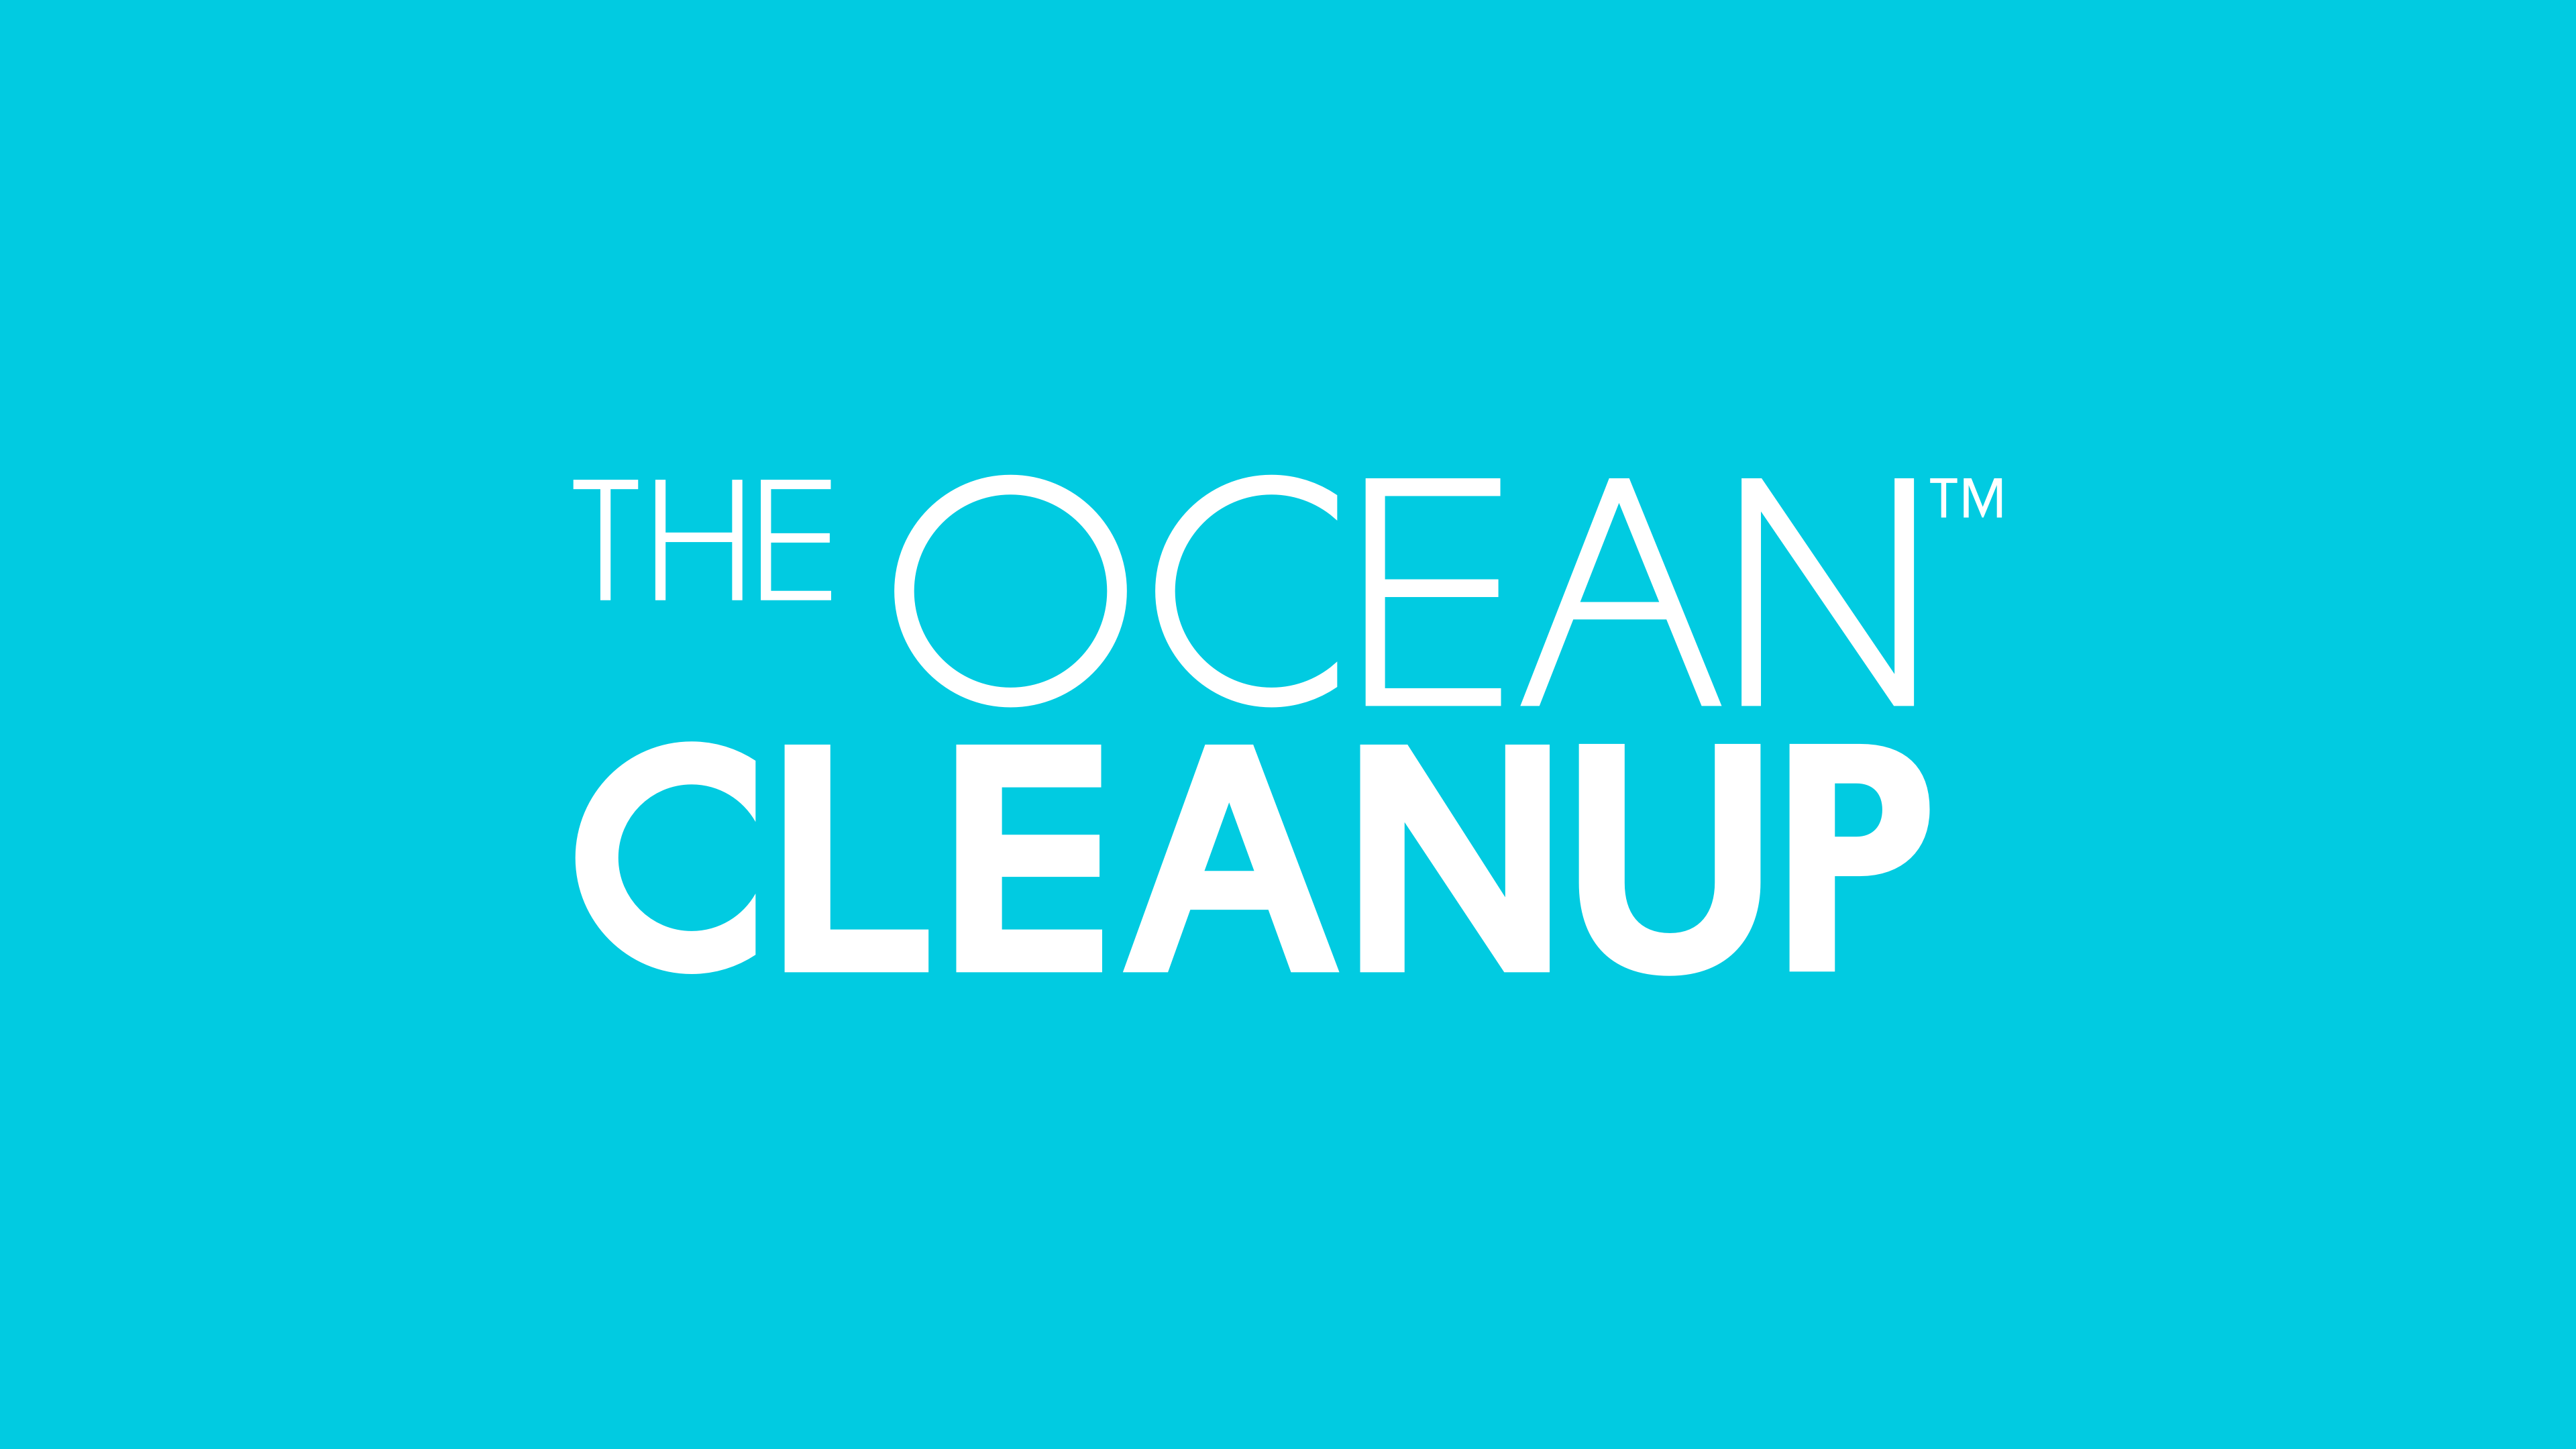 The Ocean Cleanup’s logo